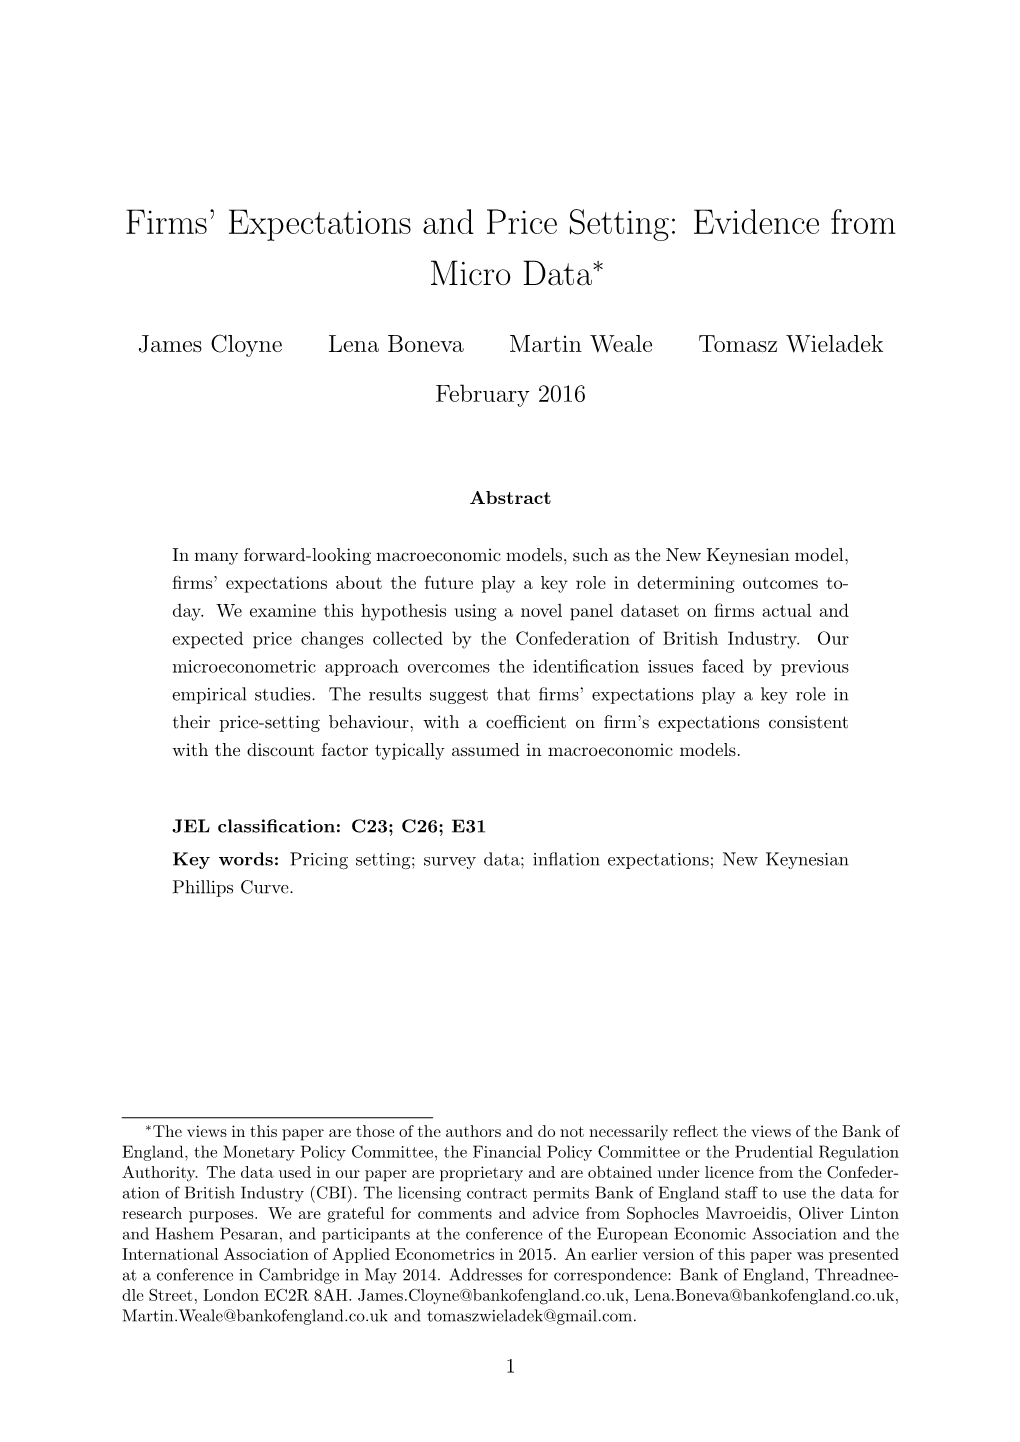 Firms' Expectations and Price Setting: Evidence from Micro Data